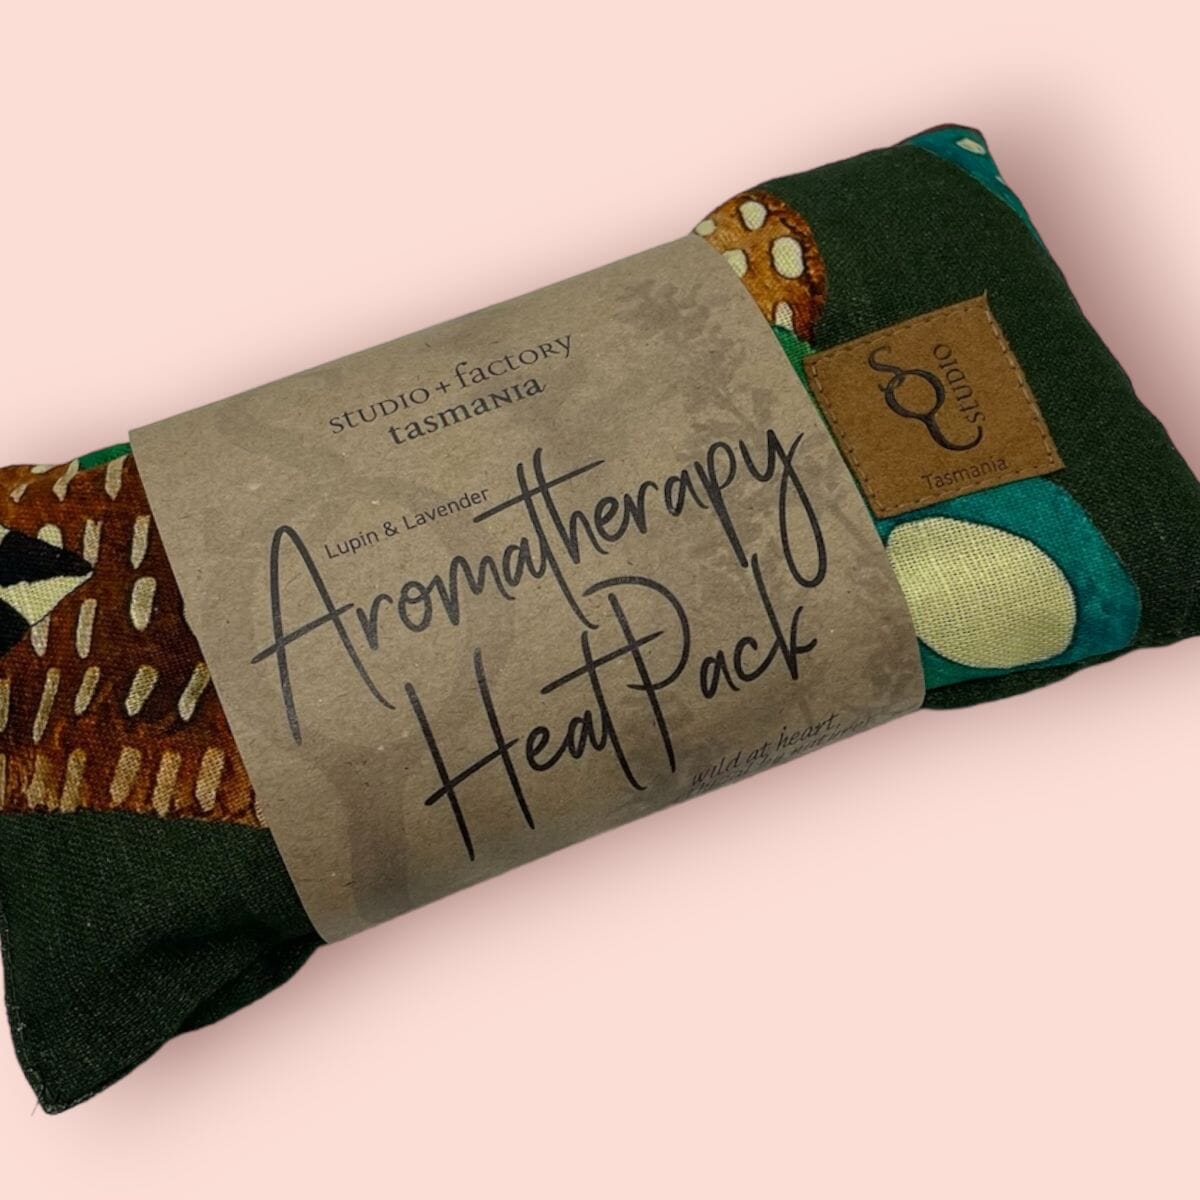 Aromatherapy Heat/Cold pack - Lupin & Lavender Heating Pads The Spotted Quoll Single Small Lost Thylacine 